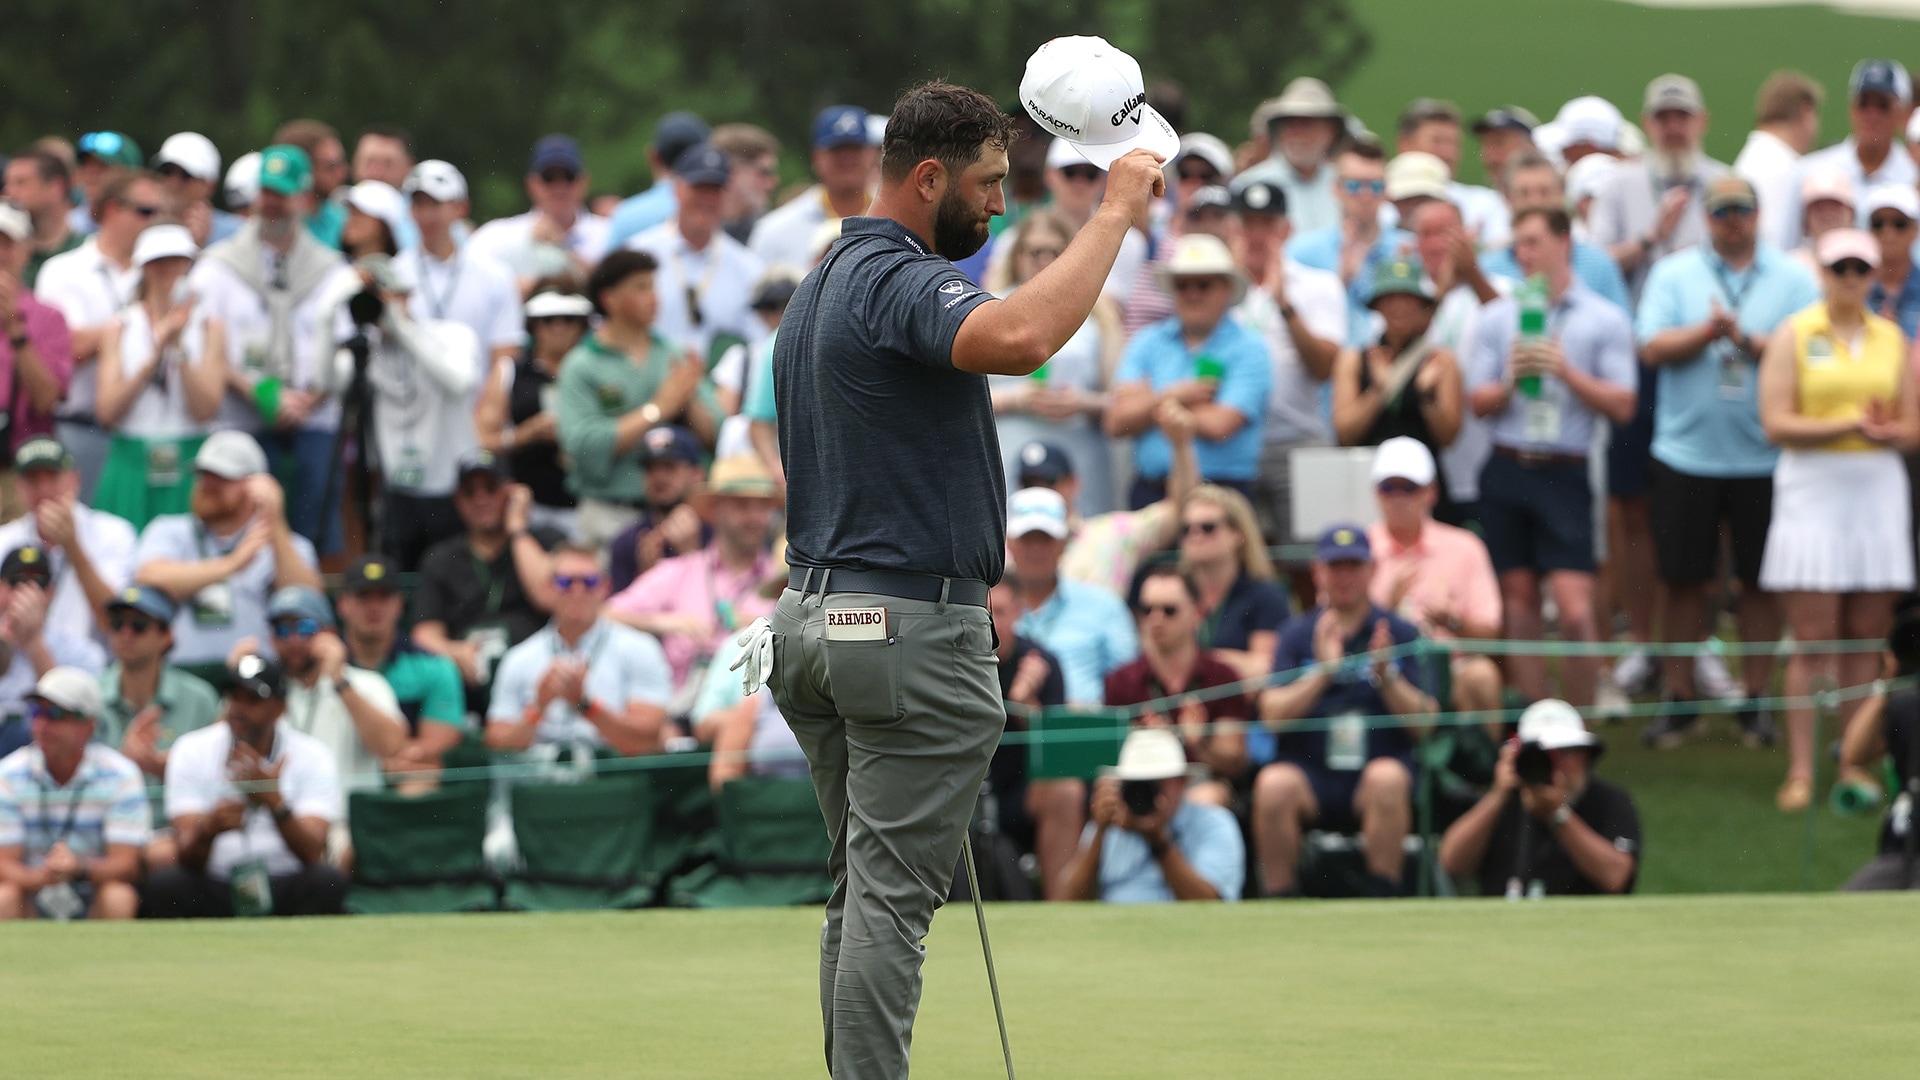 Jon Rahm channels wrong kind of Seve, still fires 65 to open 2023 Masters